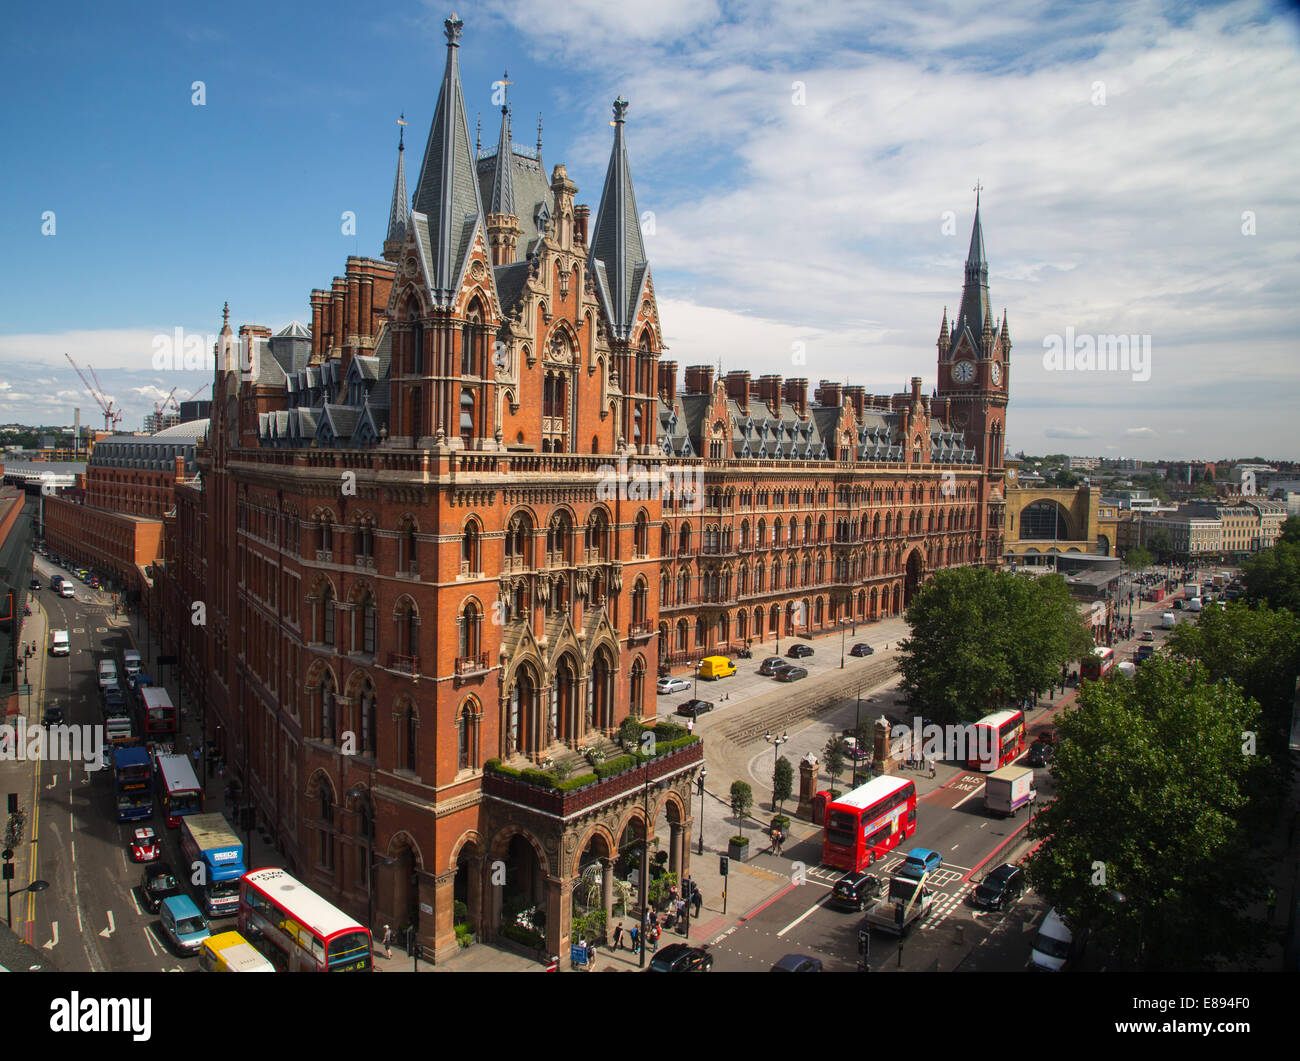 St Pancras International station serving Eurostar completed in 1868-Classic Victorian example of Gothic  architecture Stock Photo